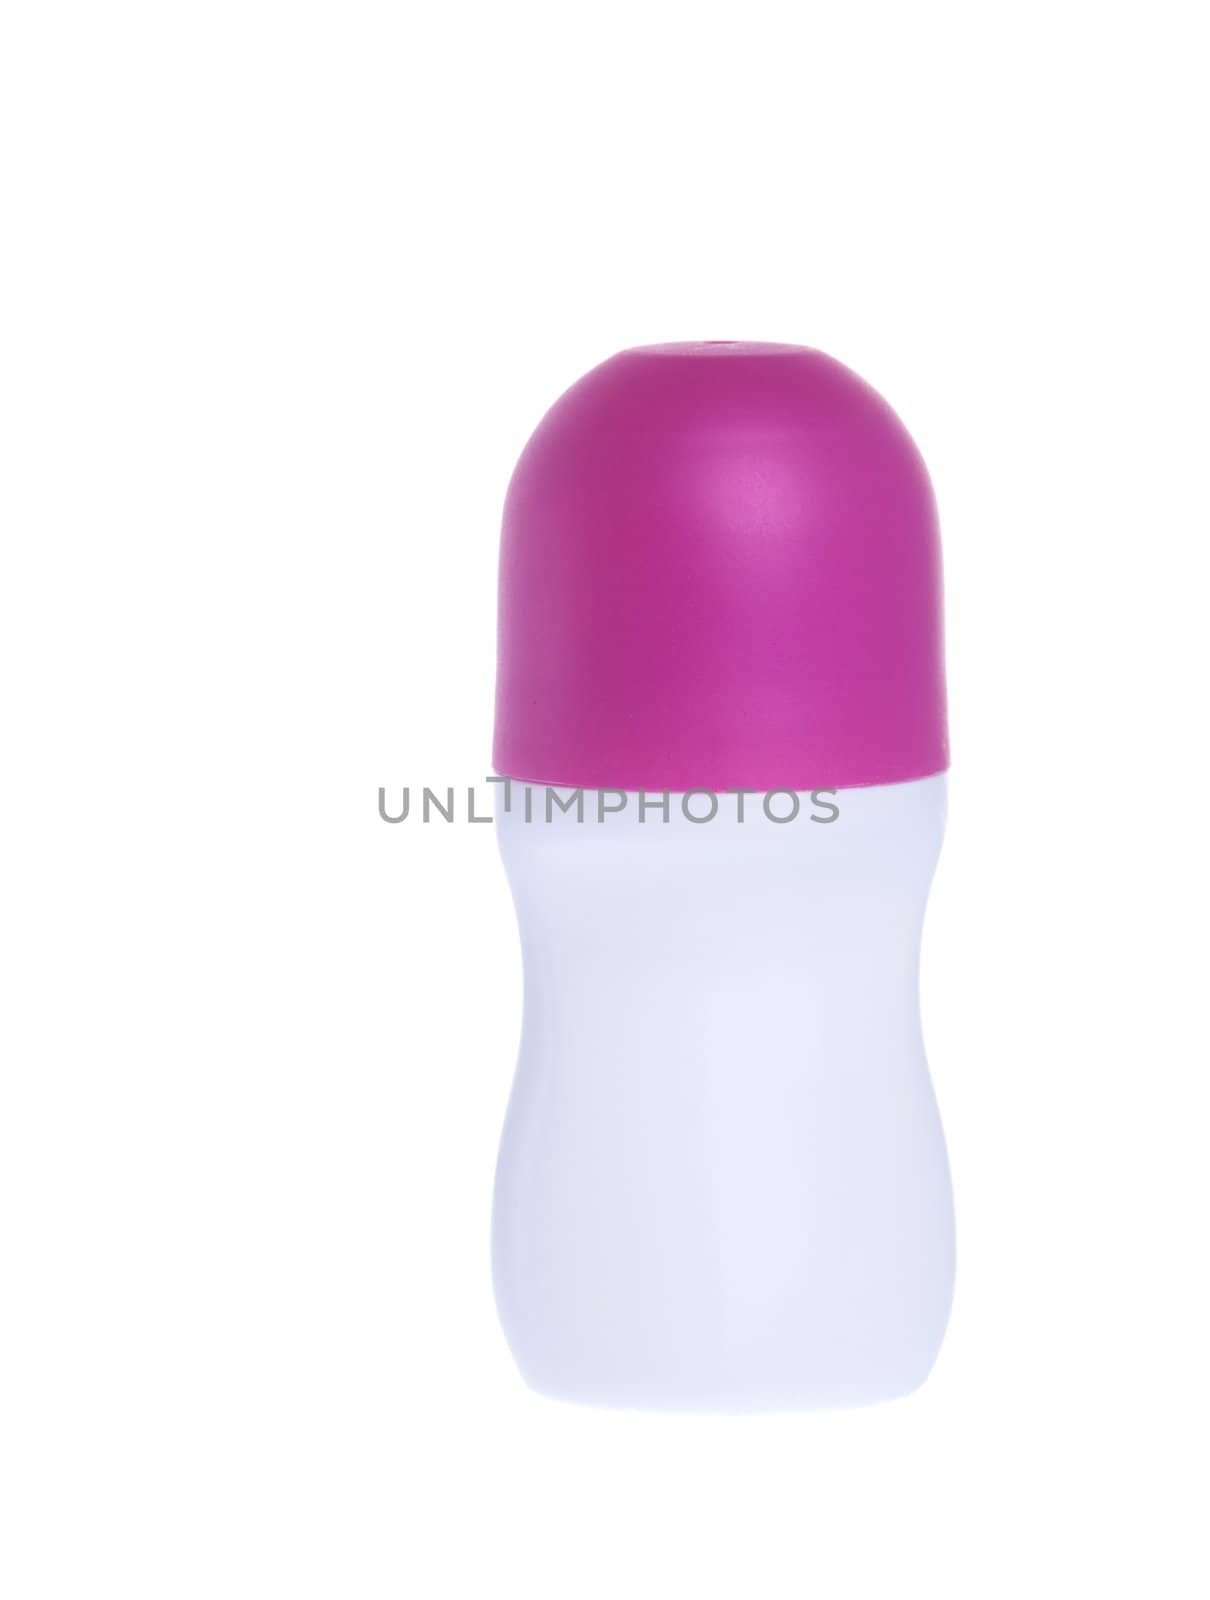 white and purple roll-on deodorant bottle isolated on white background 